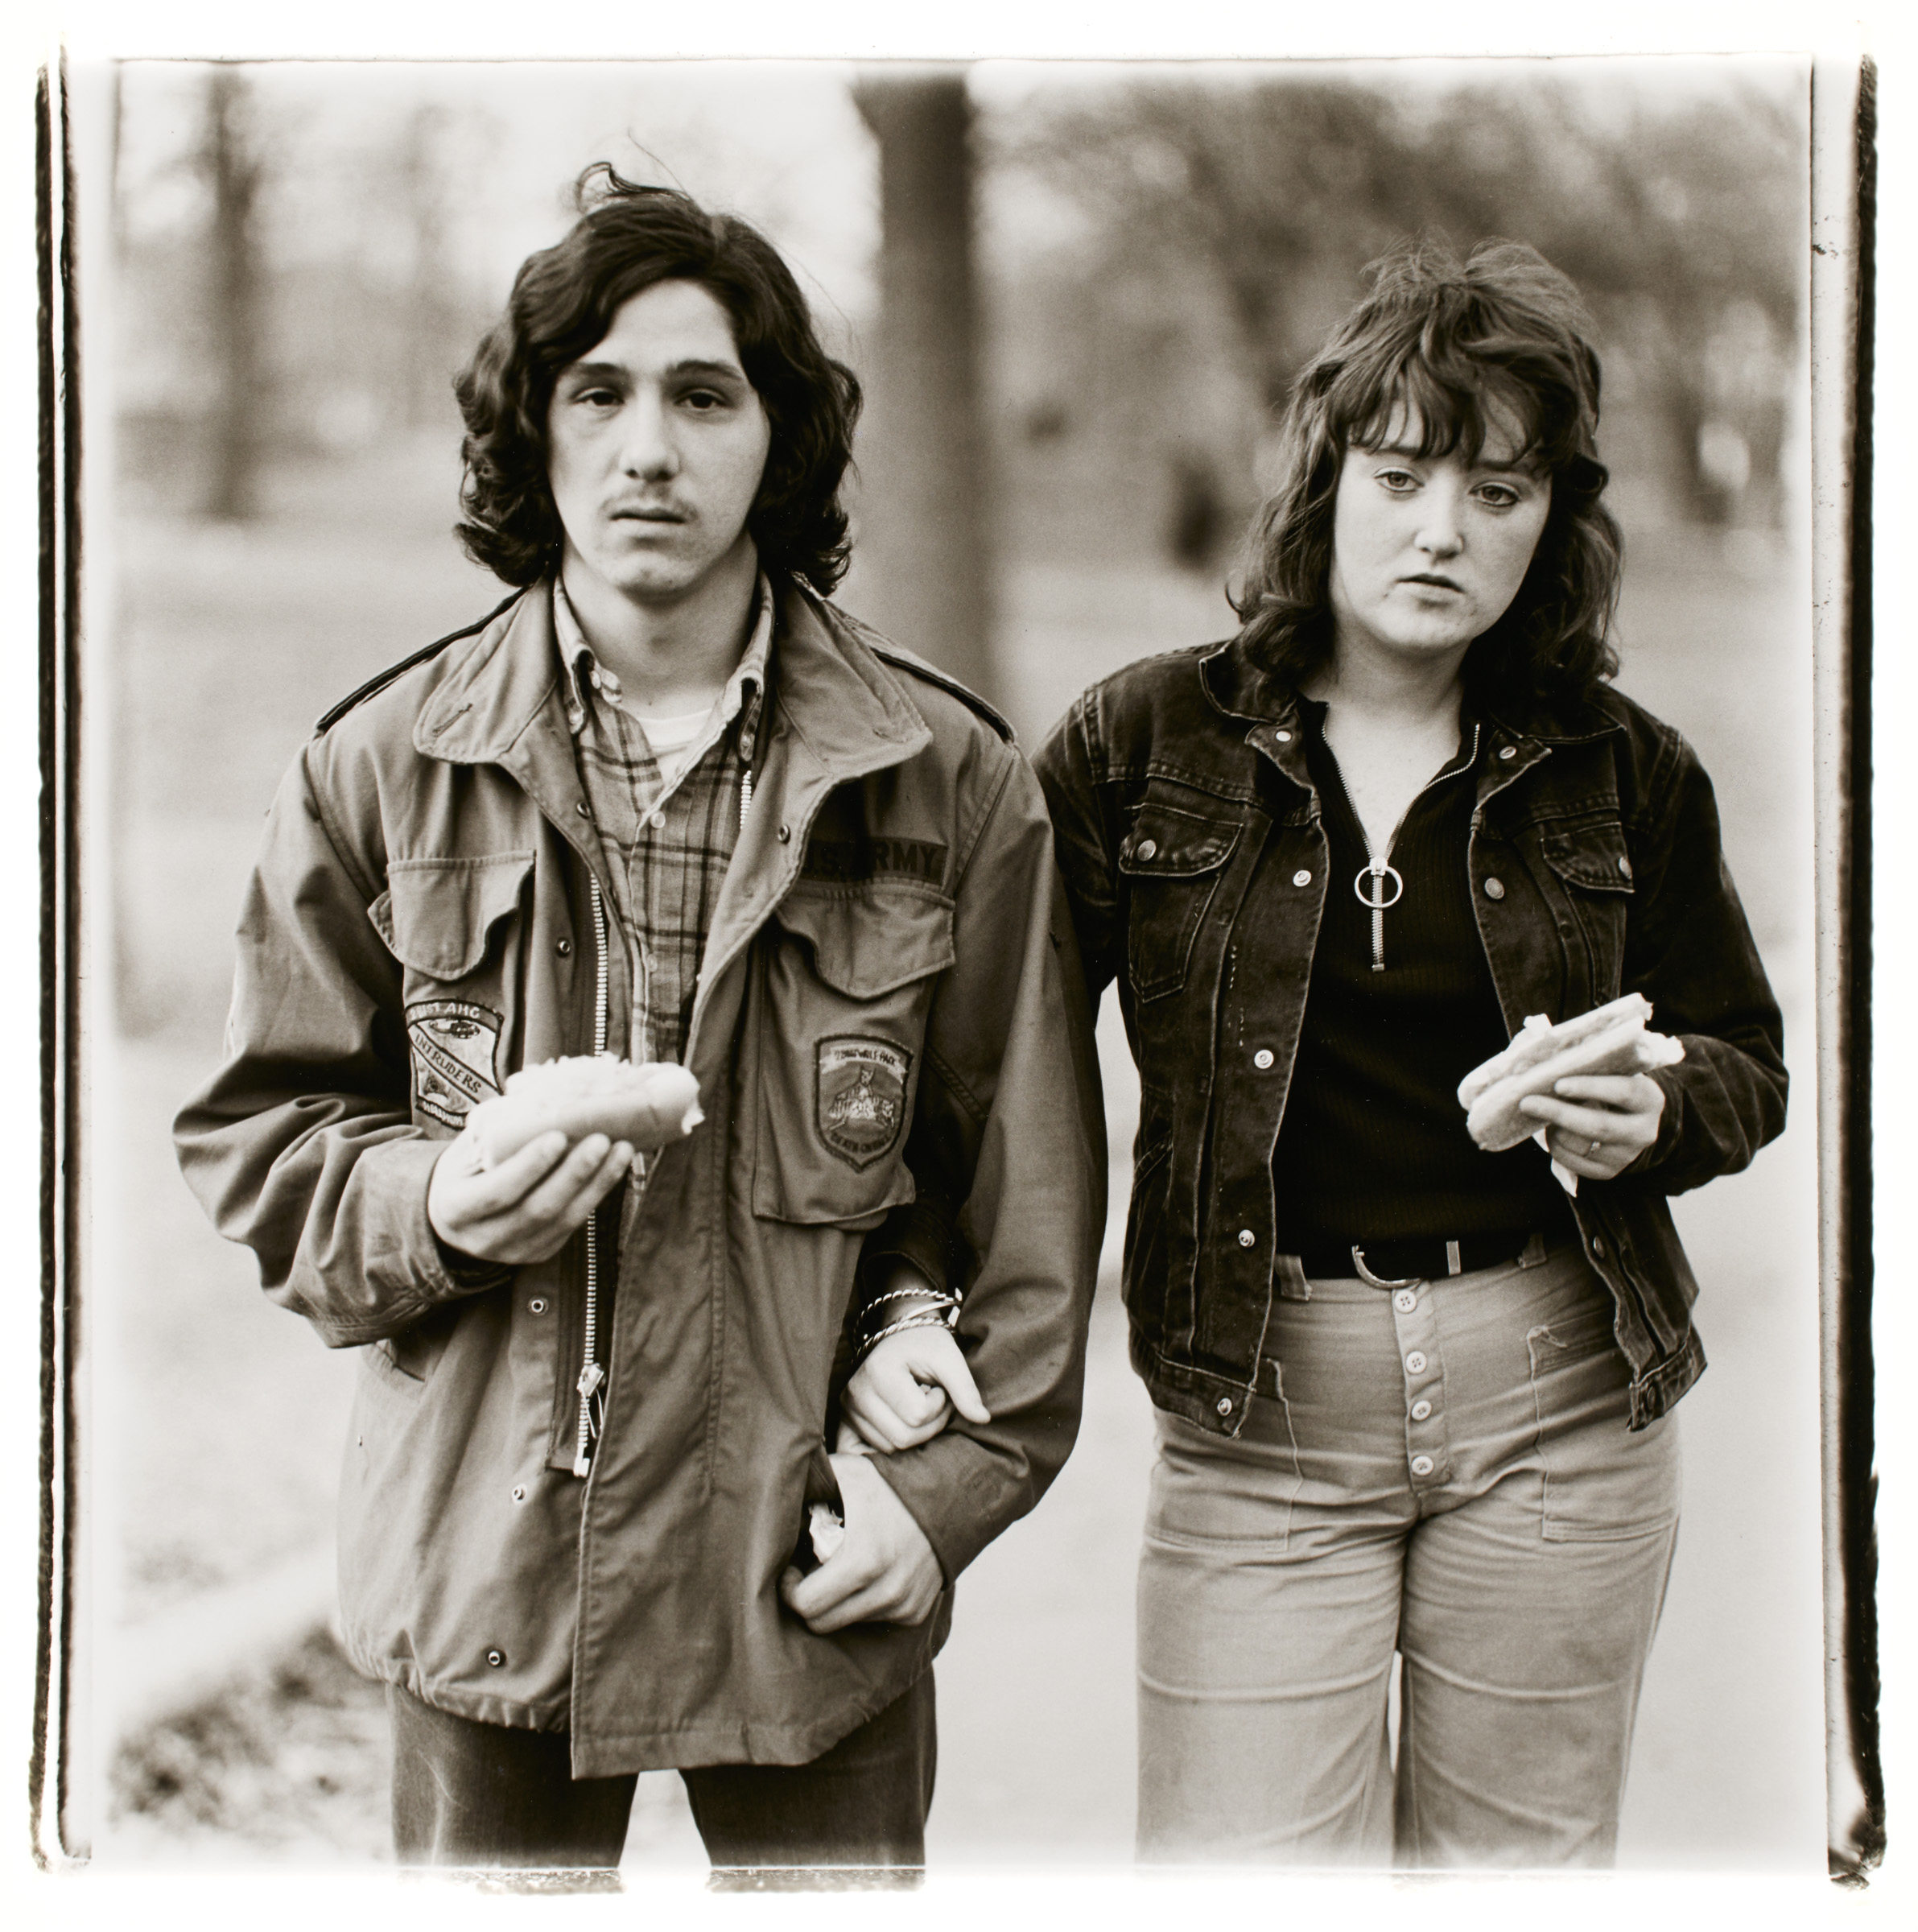     Diane Arbus, A young man and his girlfriend with hot dogs in the park, N.Y.C., 1971. Gelatin silver print, sheet: 50.8 x 40.6 cm. Art Gallery of Ontario. Gift of Jay Smith, 2016. Copyright © Estate of Diane Arbus.

